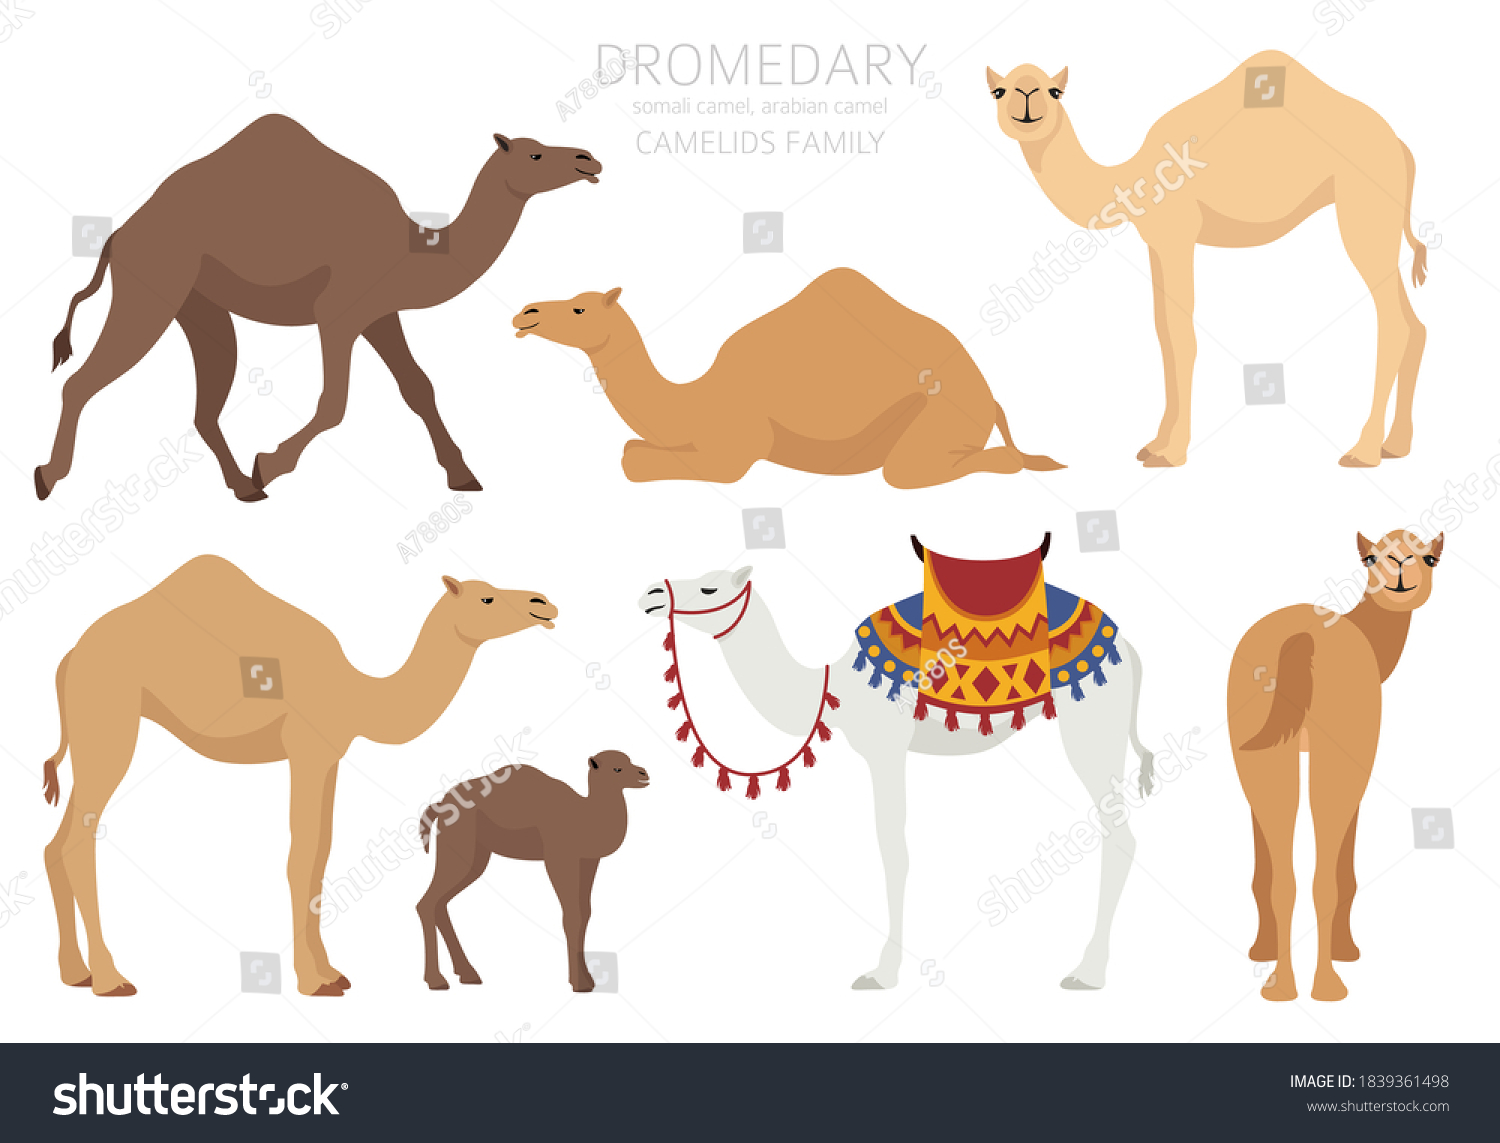 Camelids Family Collection Dromedary Camel Infographic Stock Vector ...